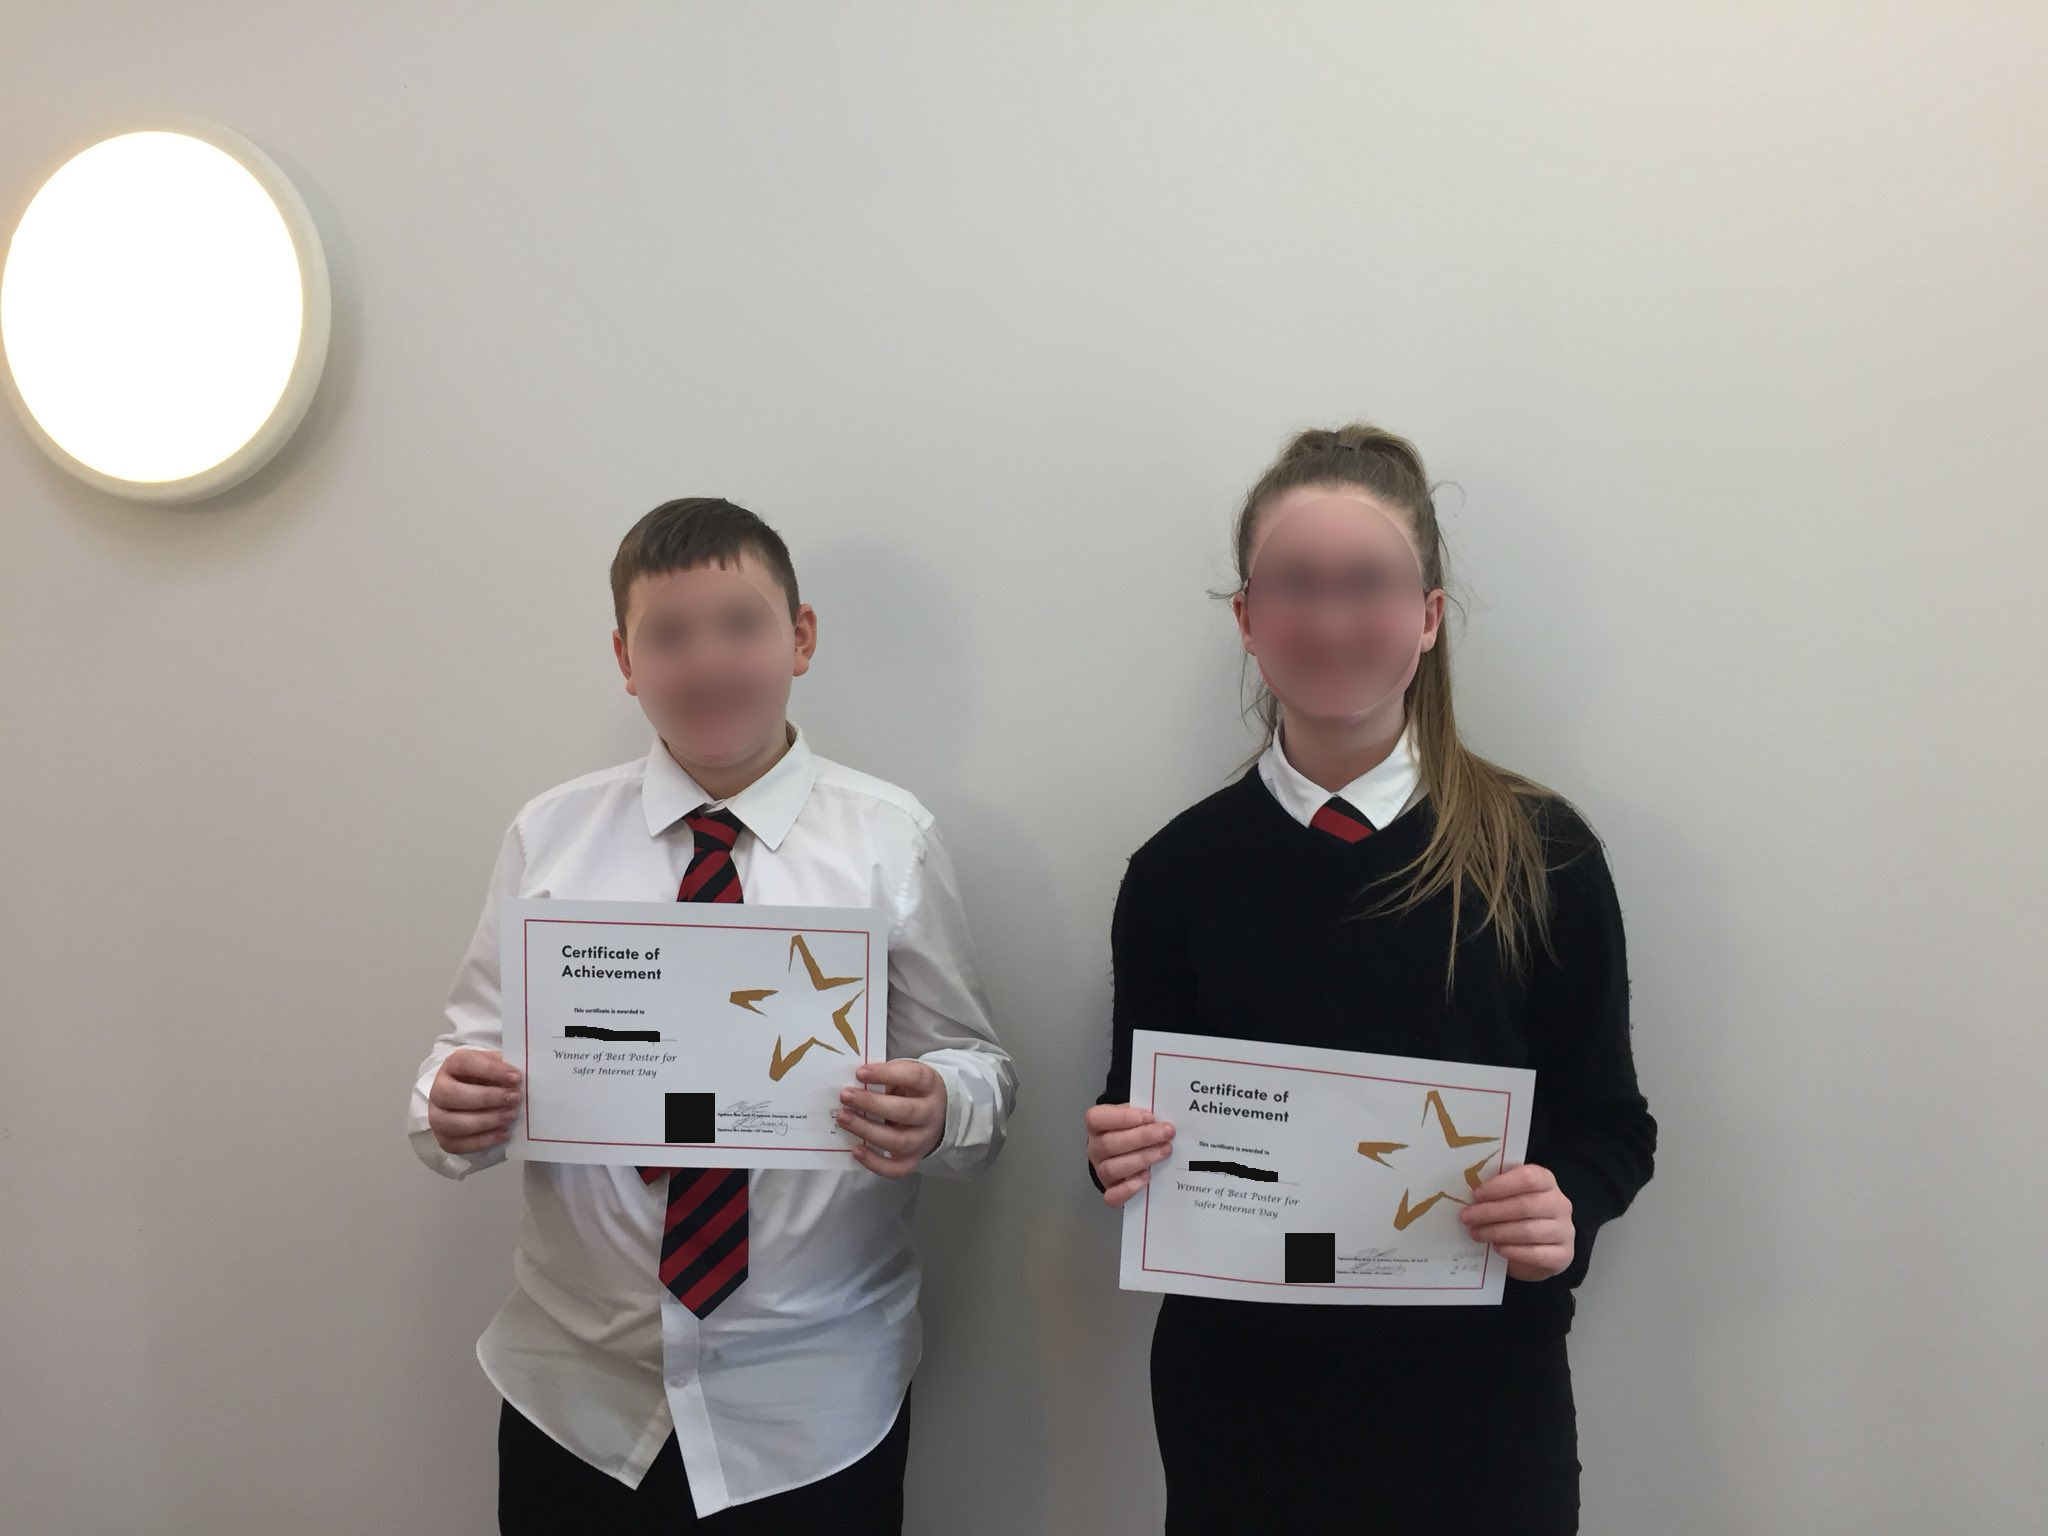 Students holding up certificates for safer internet day